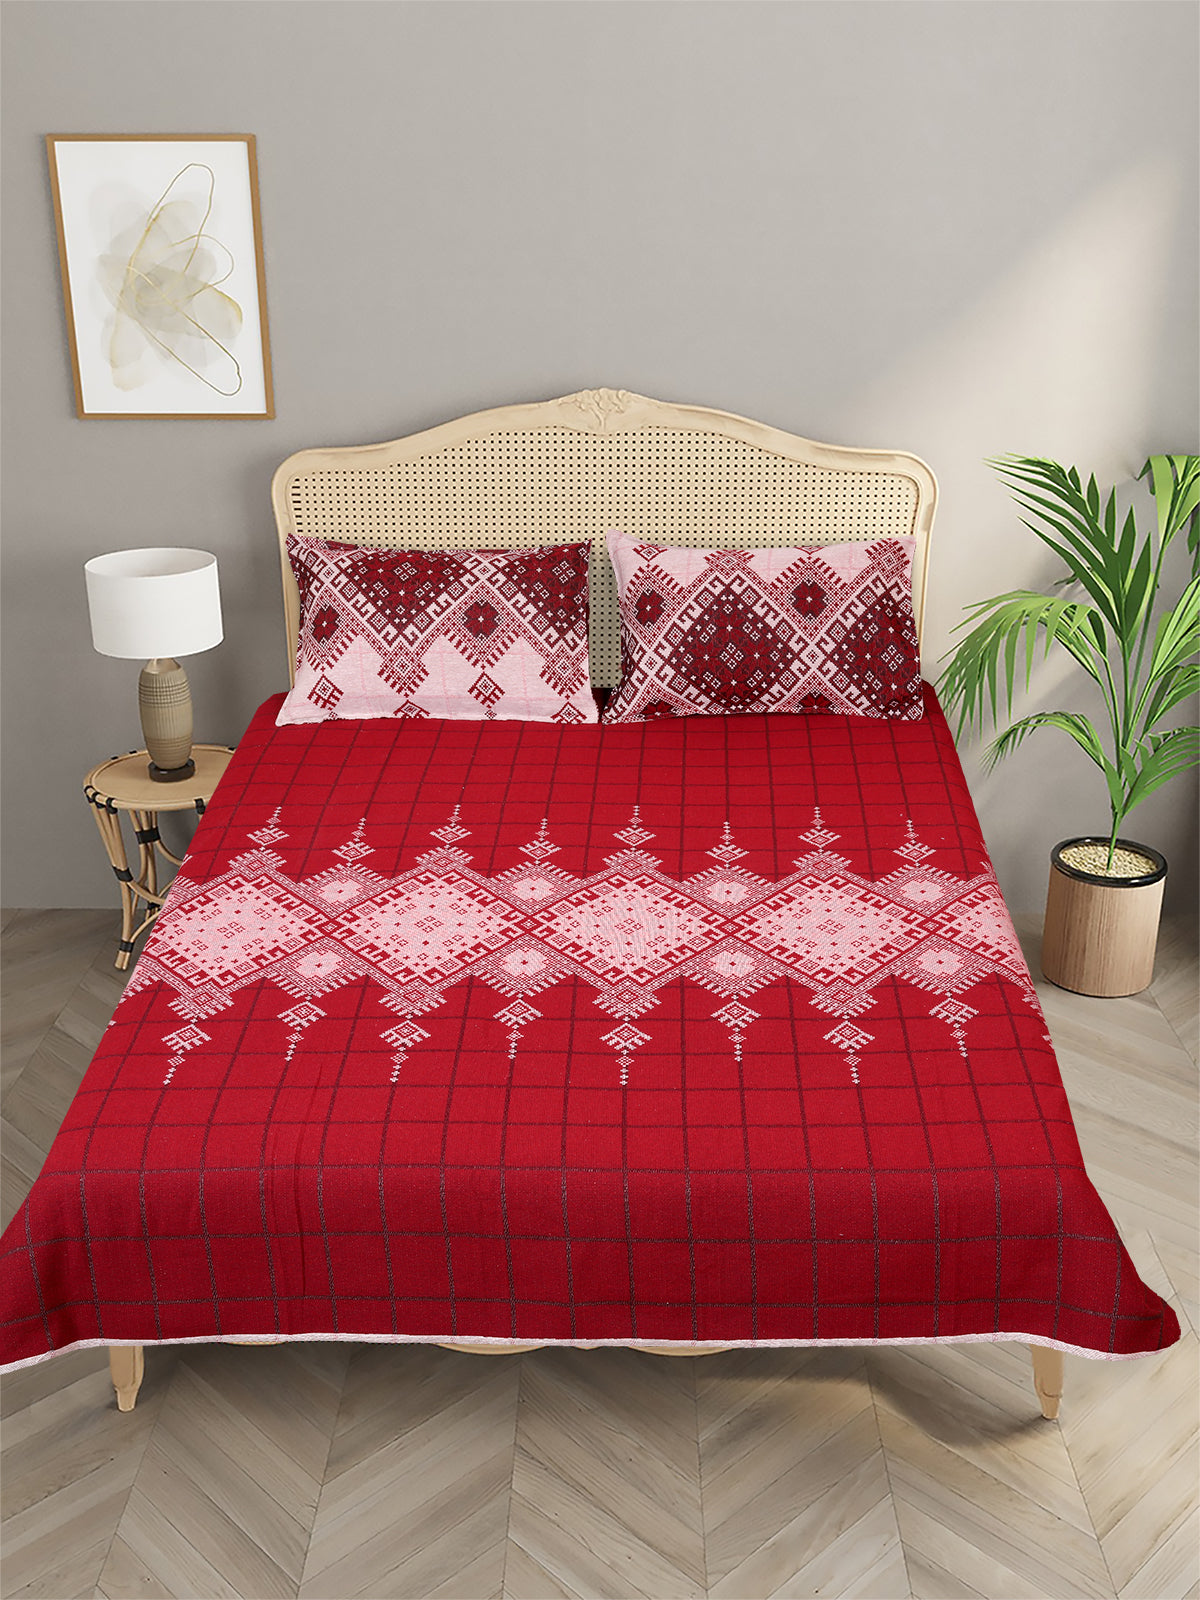 Beige & Maroon Ethnic Motifs Patterned Reversible Double Bed Cover With 2 Pillow Covers